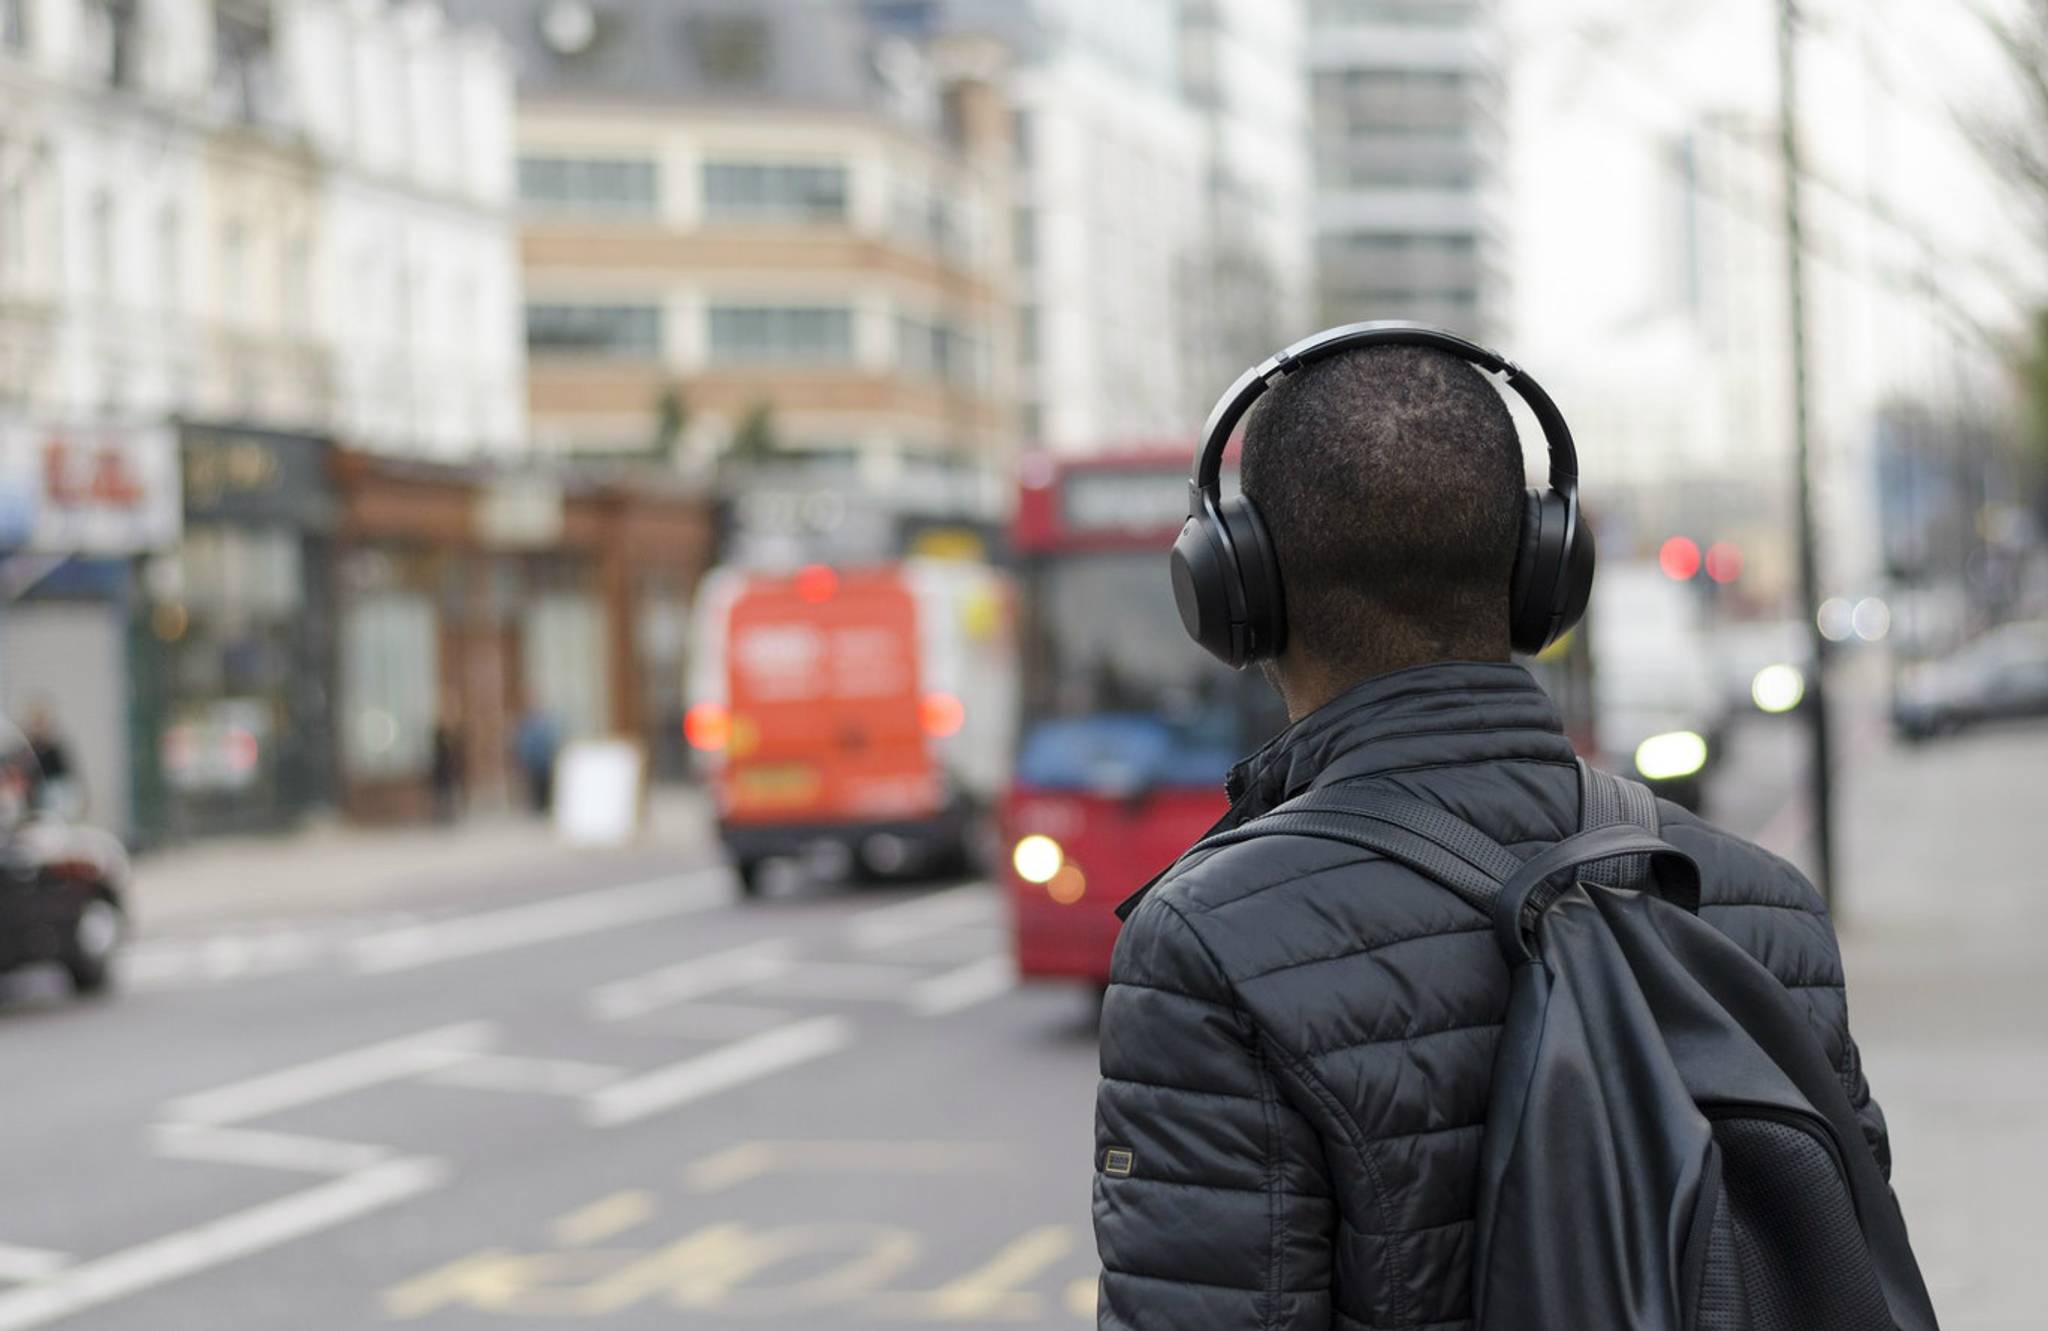 Depaul's Spotify helps teens connect with the homeless